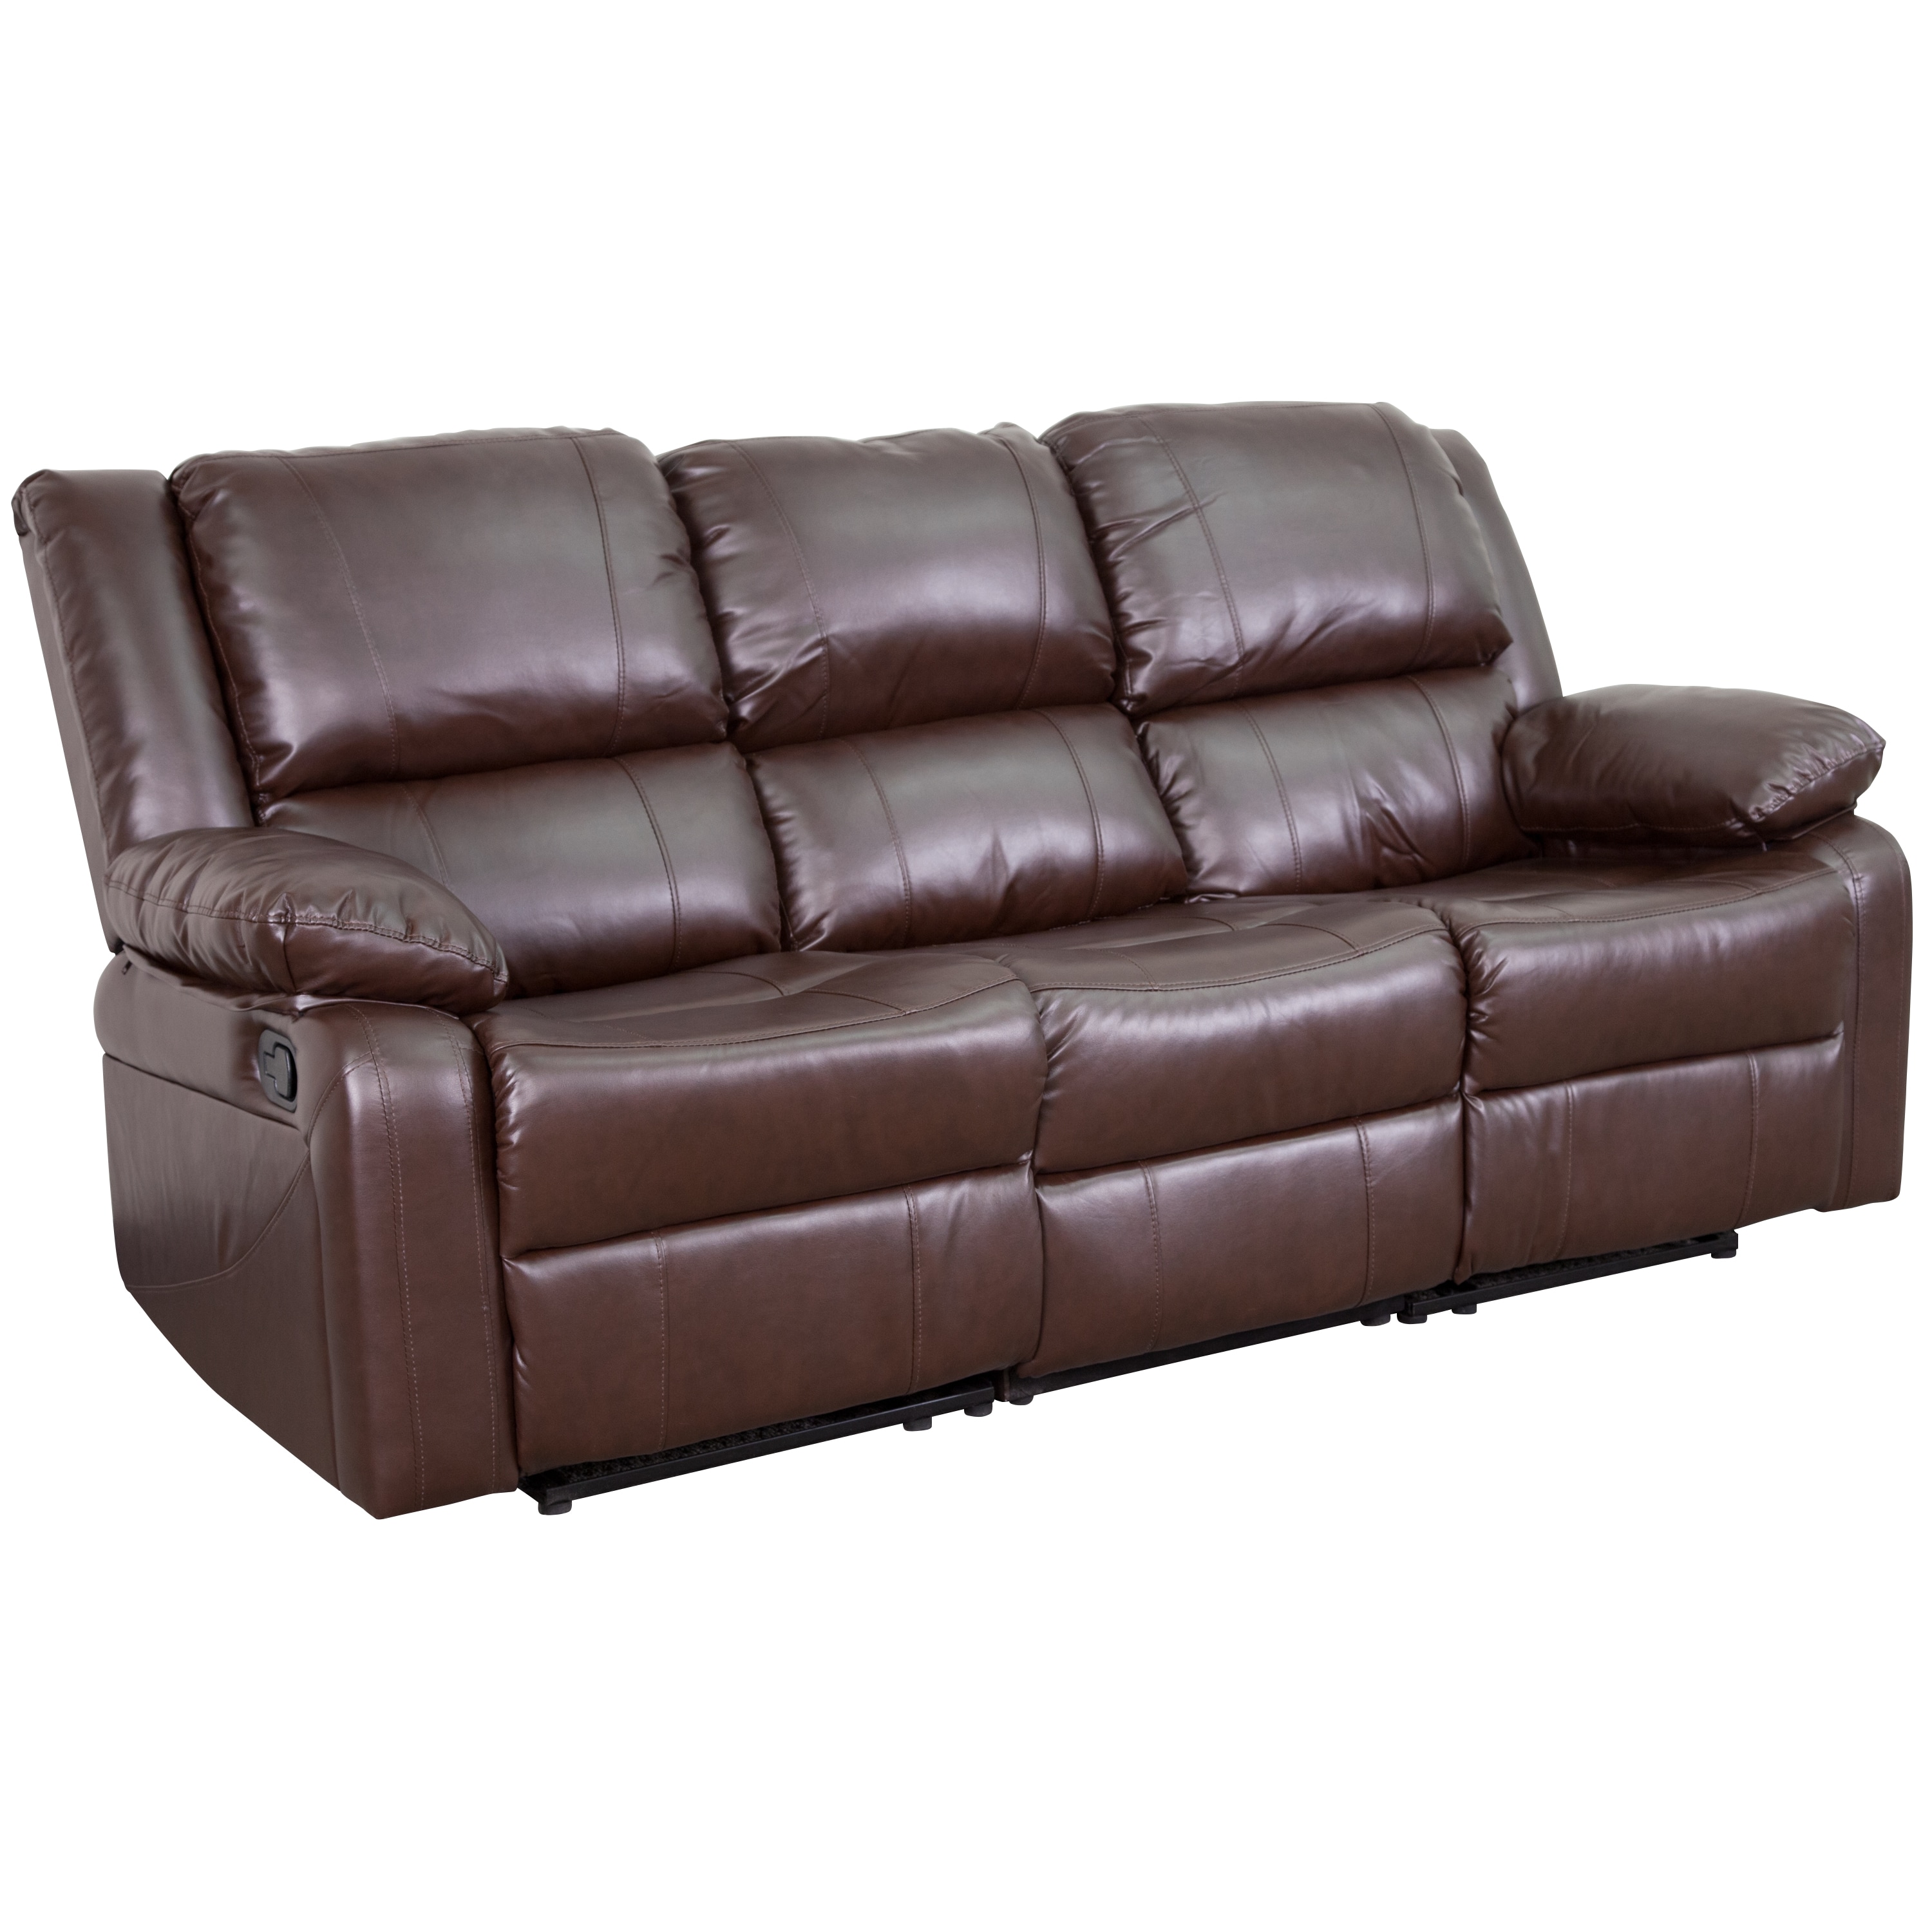 Flash Furniture Harmony Series Modern, Brown Leather Couch With Recliners